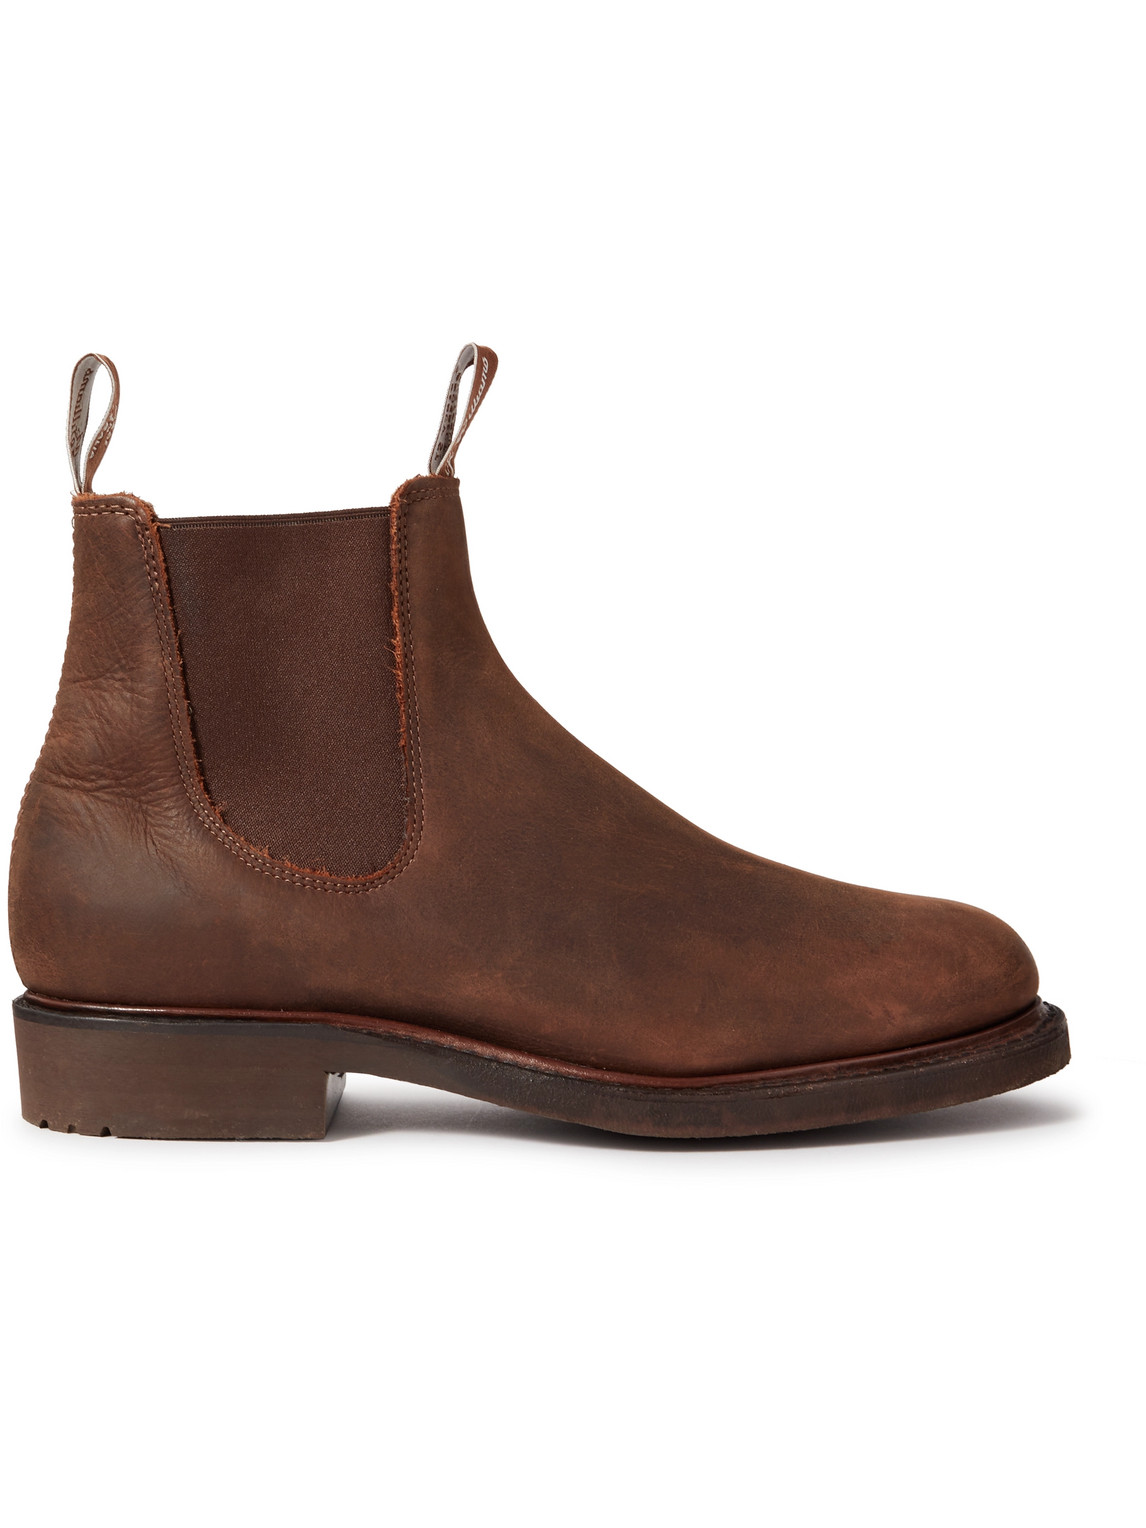 R.m.williams Comfort Goodwood Leather Chelsea Boots In Brown